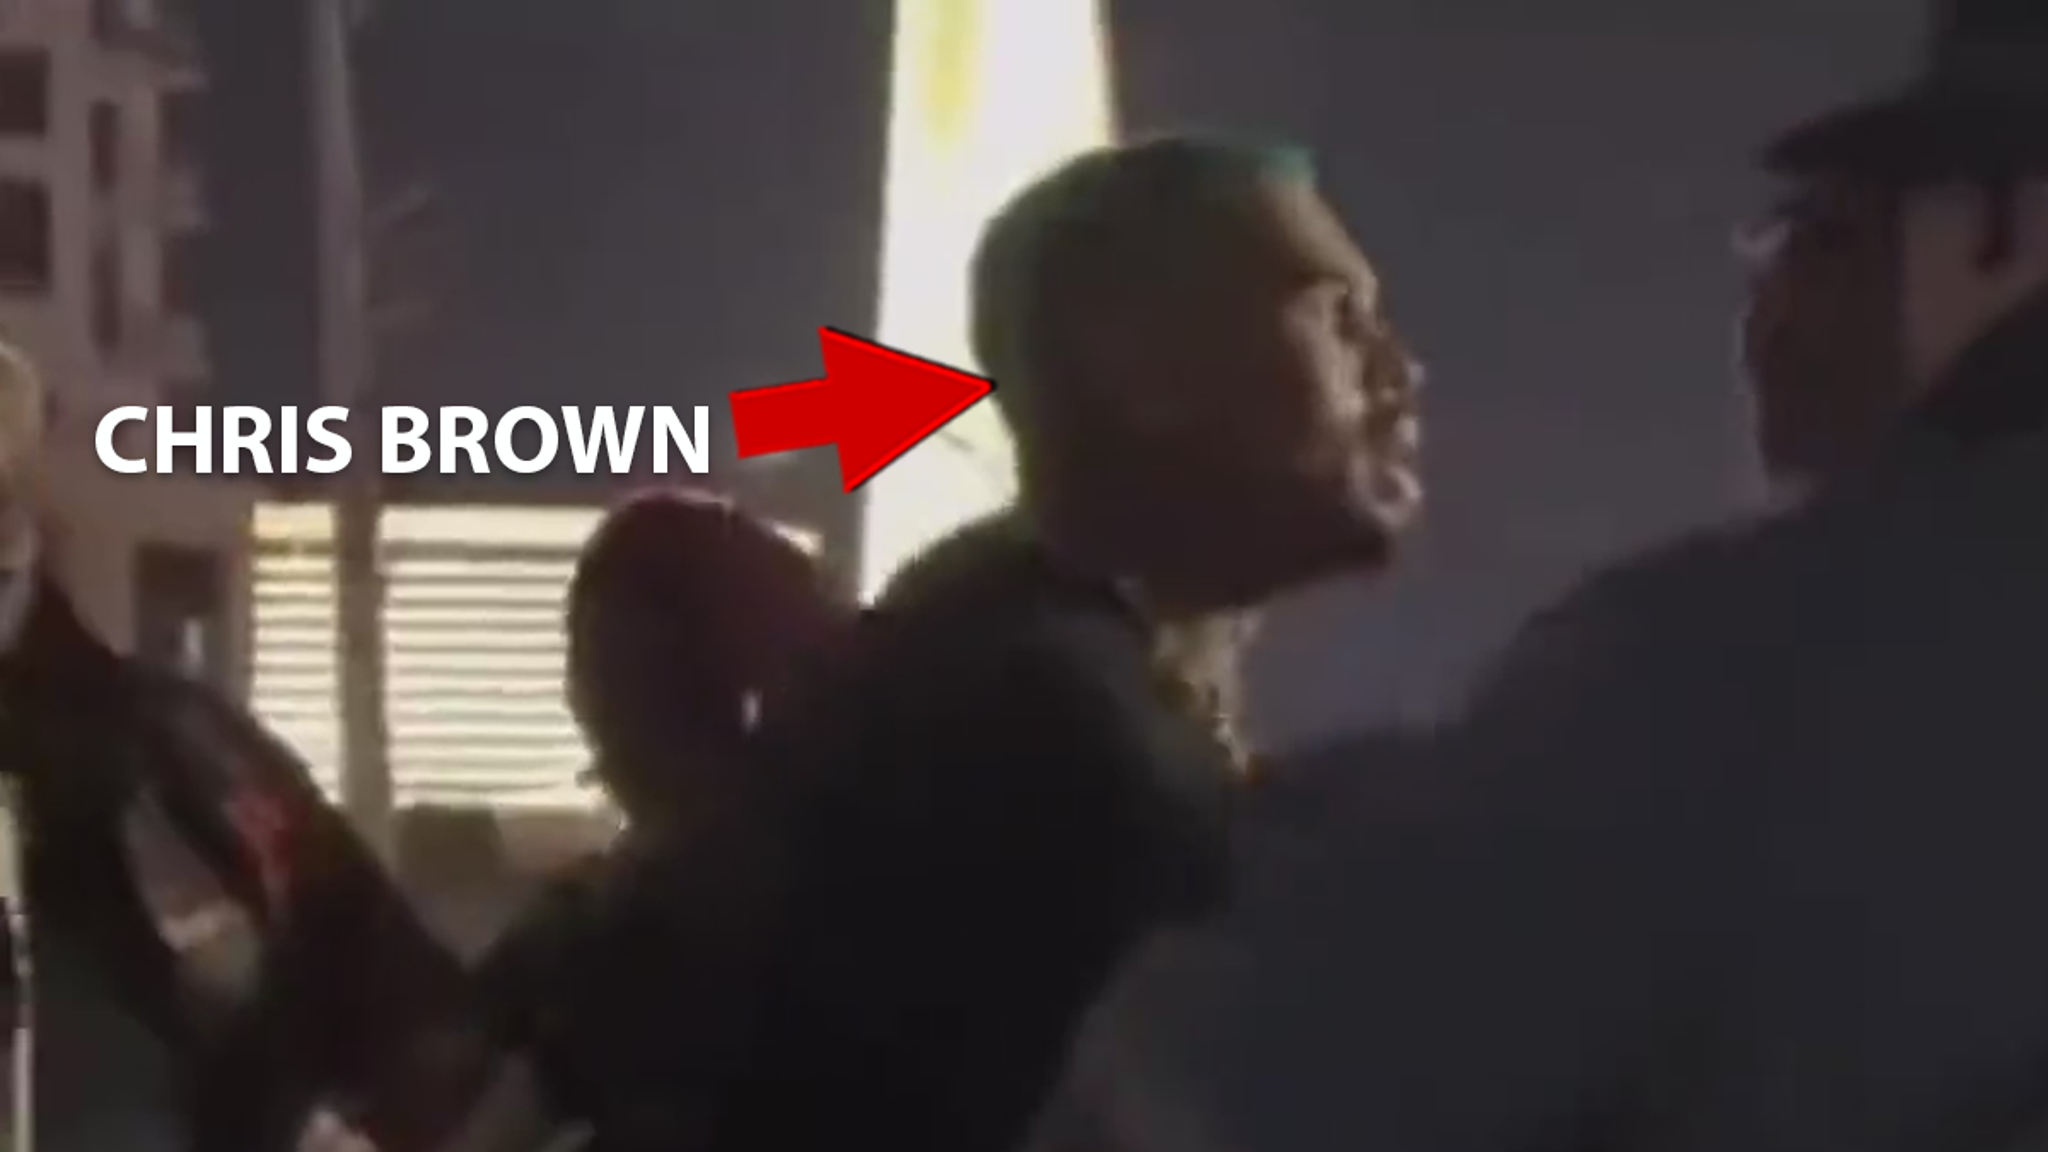 Chris Brown Involved in Another Confrontation After Usher Incident #Usher